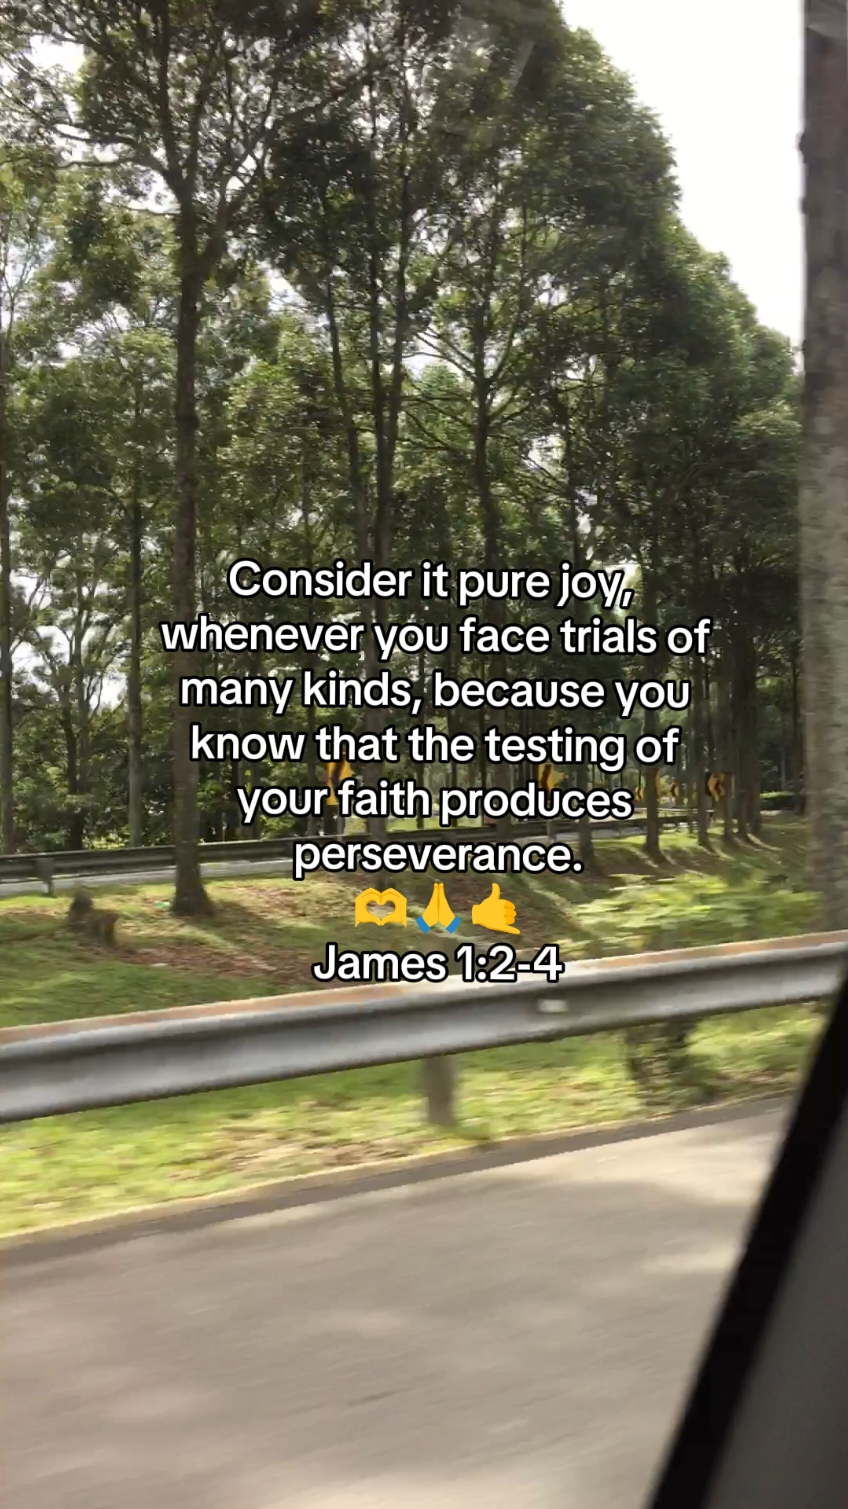 Consider it pure joy, whenever you face trials of many kinds, 3 because you know that the testing of your faith produces perseverance.  🫶🙏🤙 James 1:2-4 #verseoftheday  #James1:2-4 #godspurpose #trials  #brokeness #testing #perseverance #acceptance  #esemtea #fypシ  #fypage  #fypシ゚viral  #everyone 